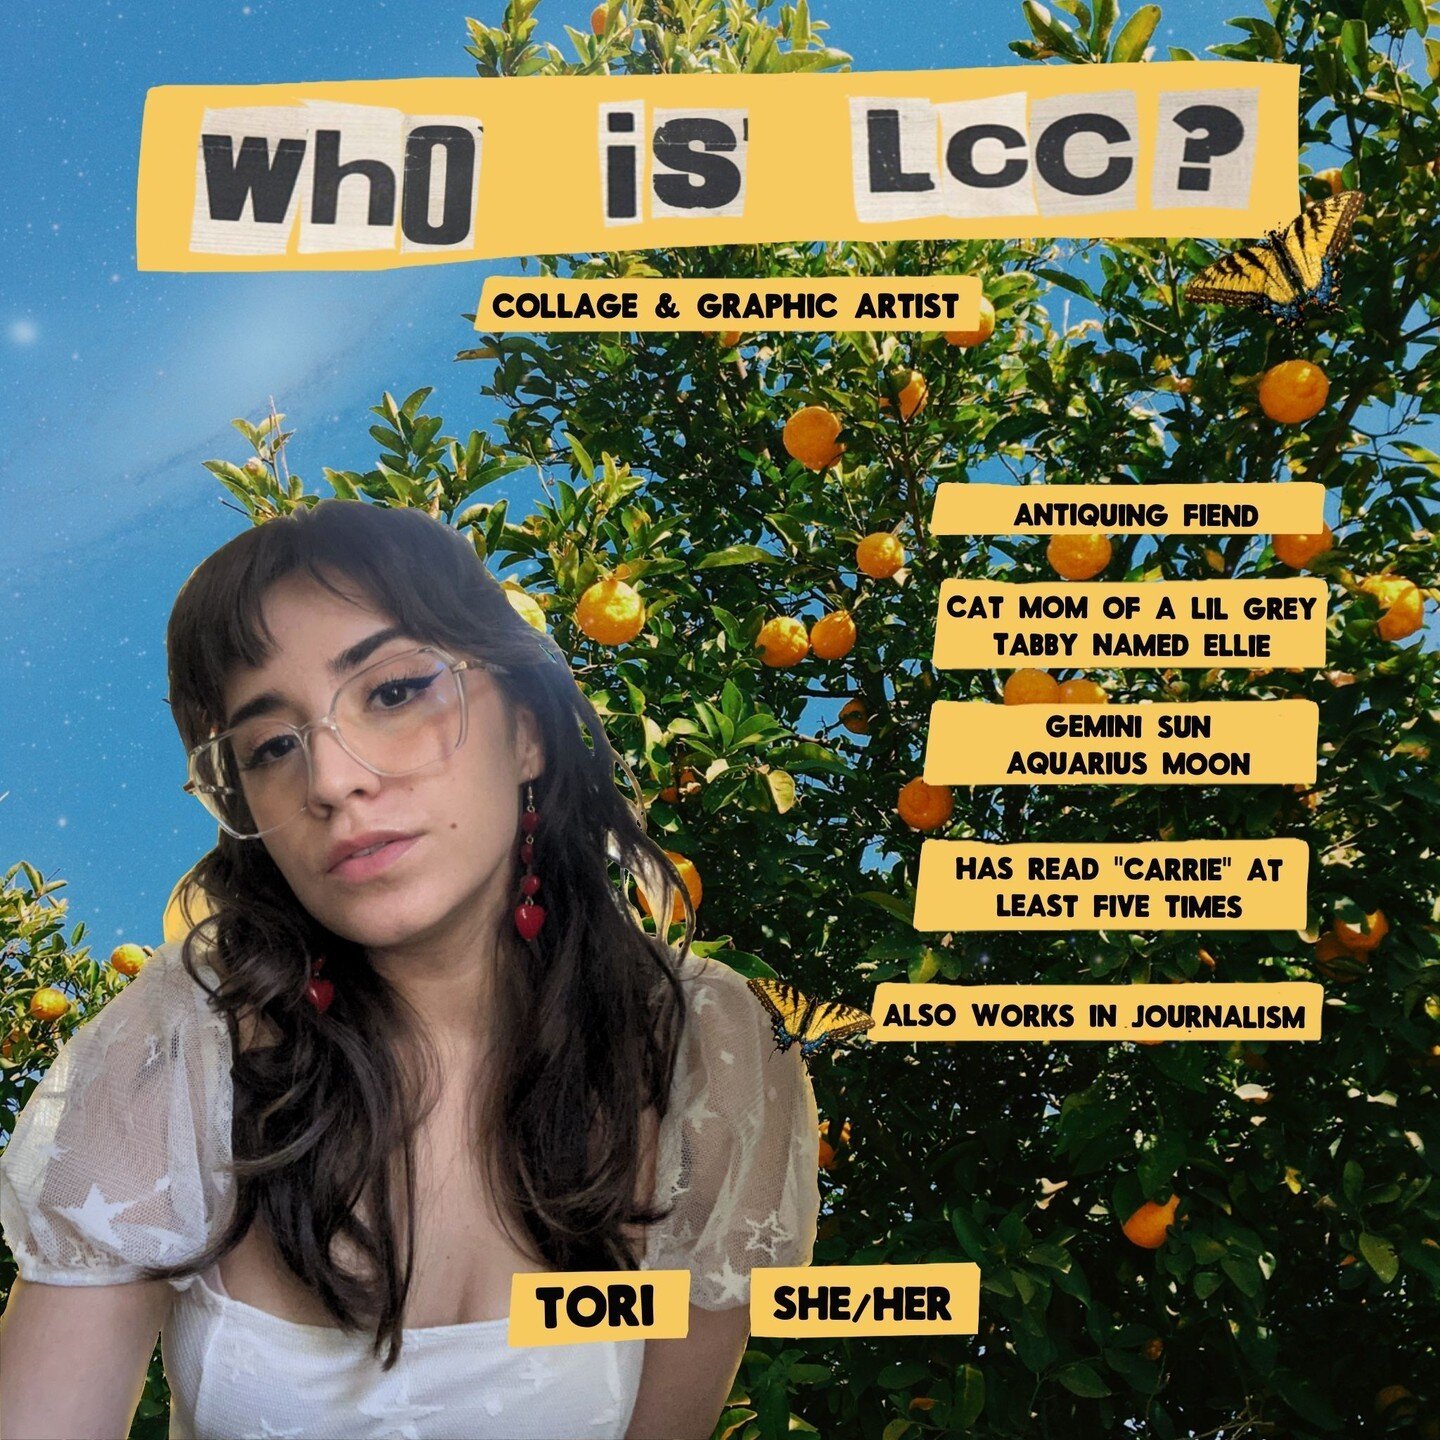 hello hello! it's been a while since introducing myself here. 💛 

for those of you who are new here or don't know me, i'm tori, the collage artist and graphic designer behind low culture committee. 👋 

i'm currently based out of nashville, tn &mdas